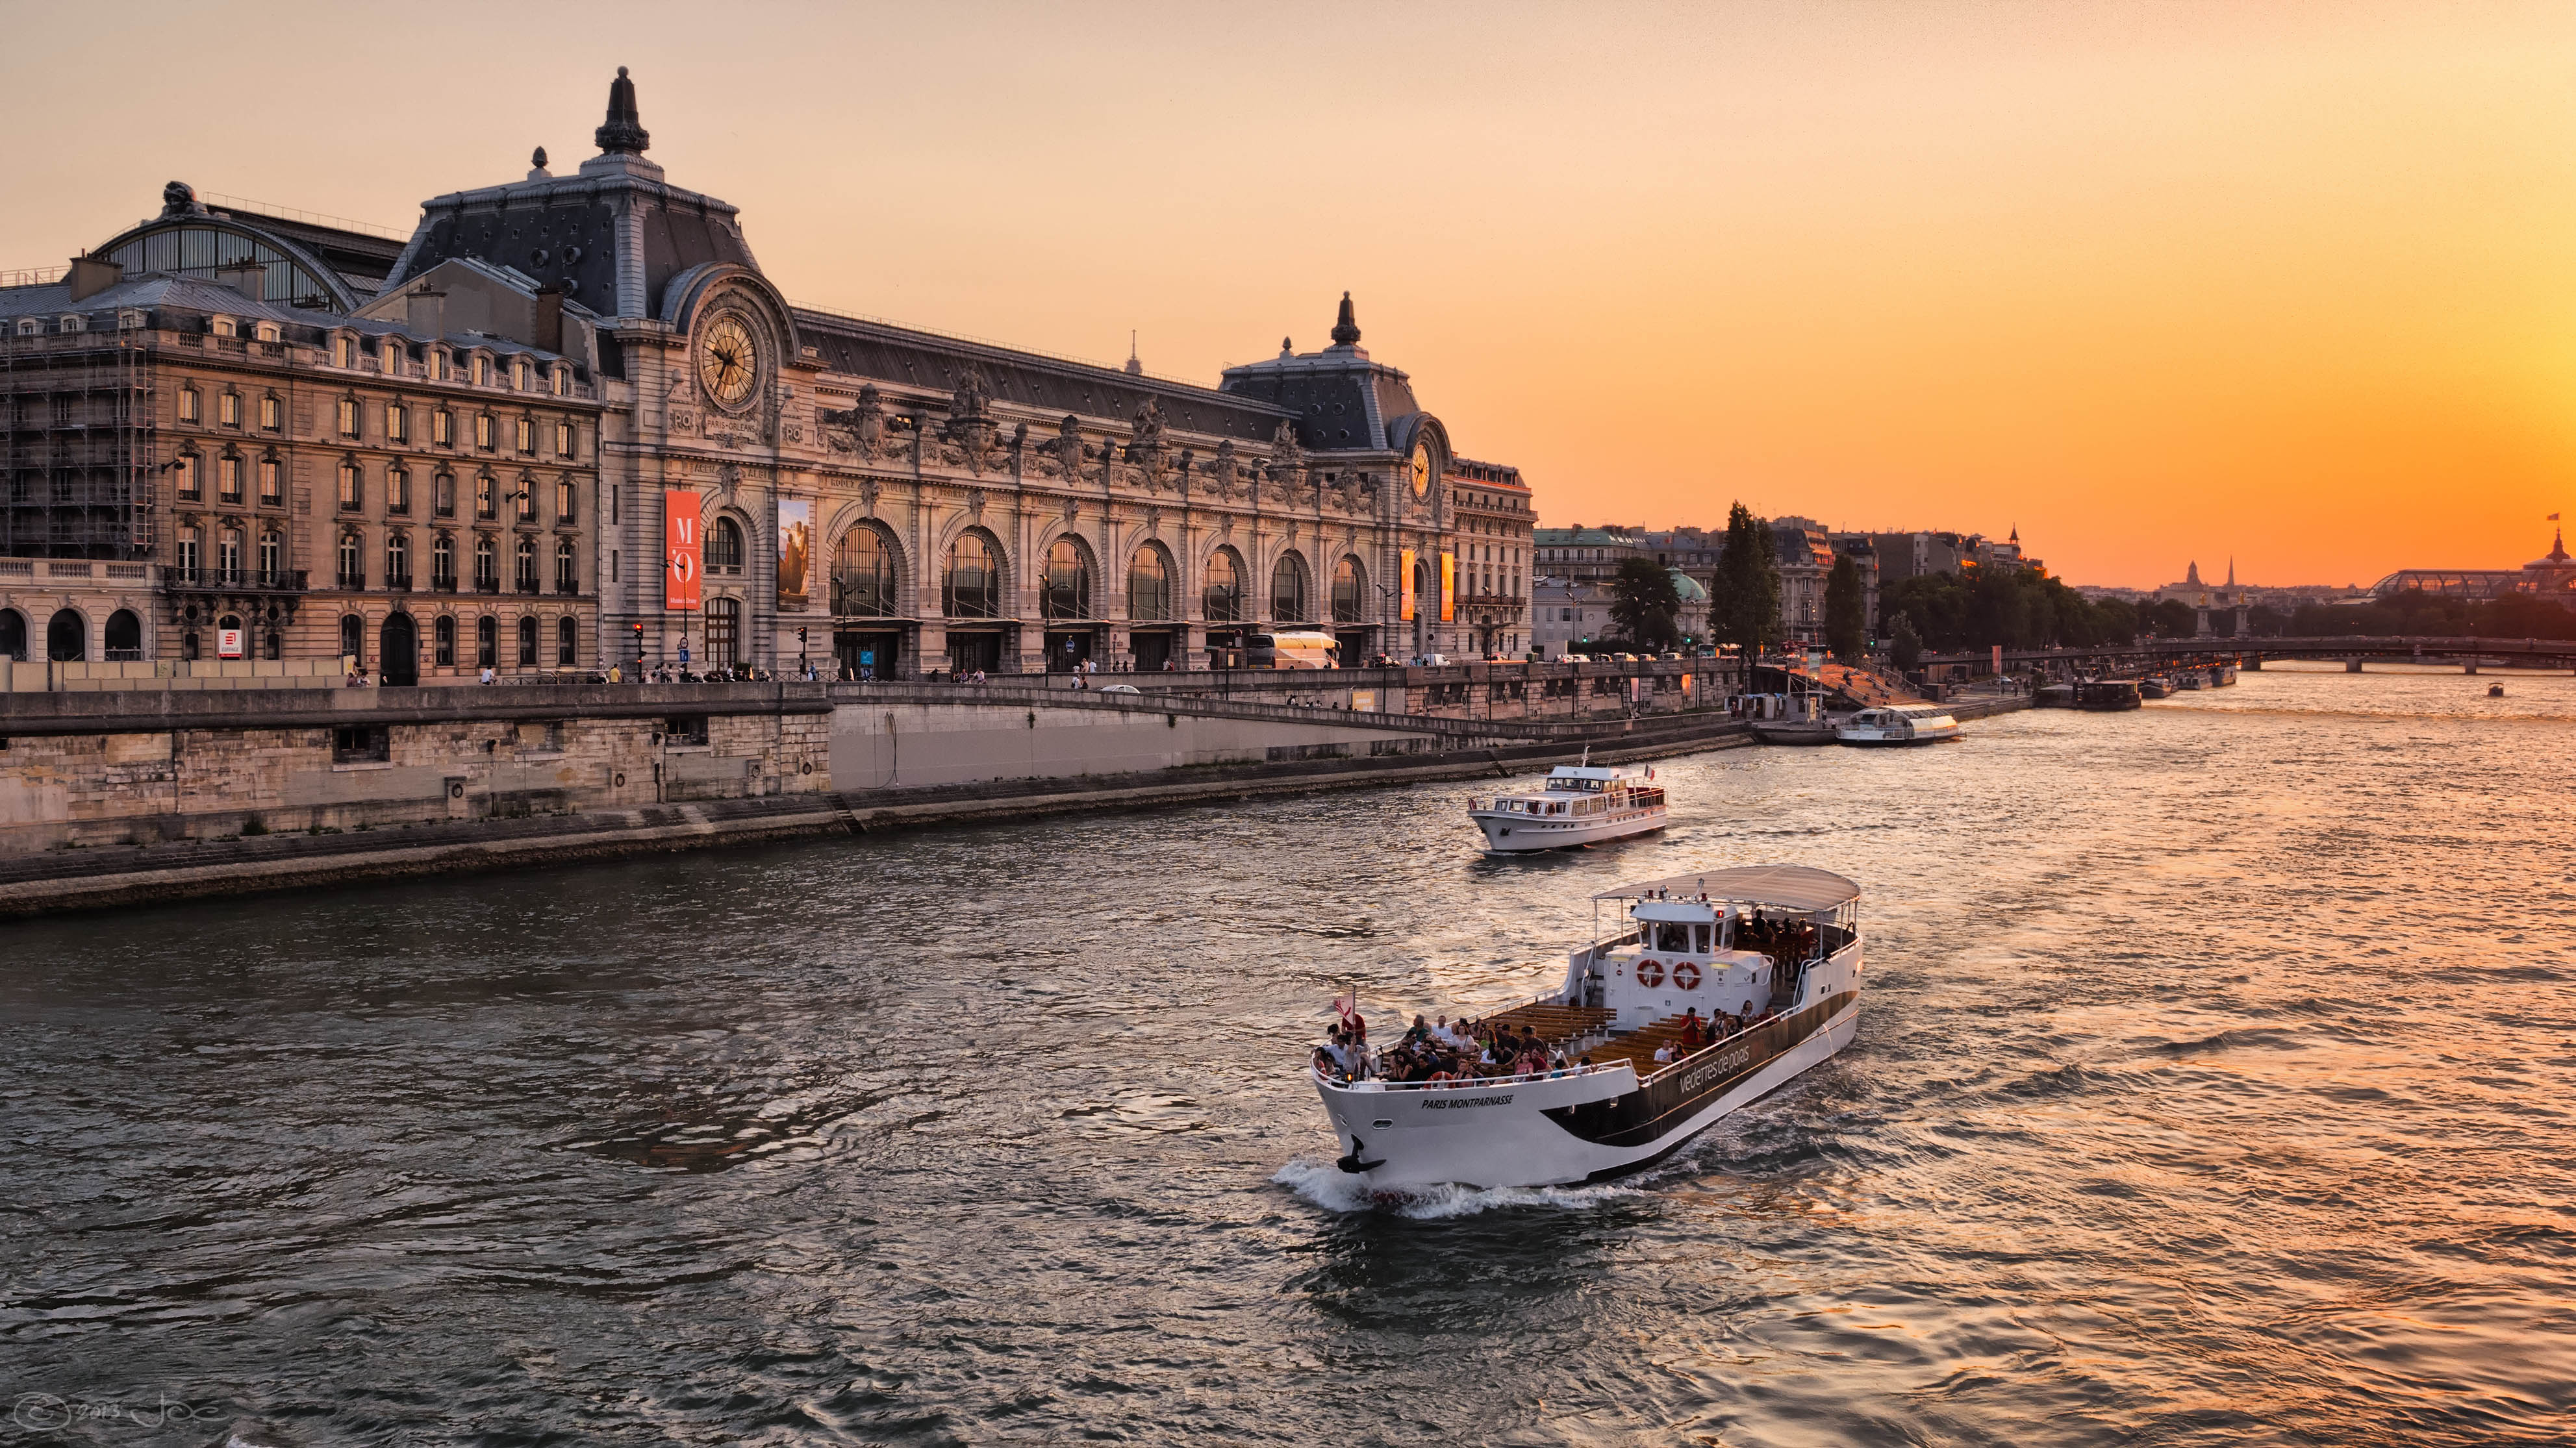 The musée d'orsay at sunset photo